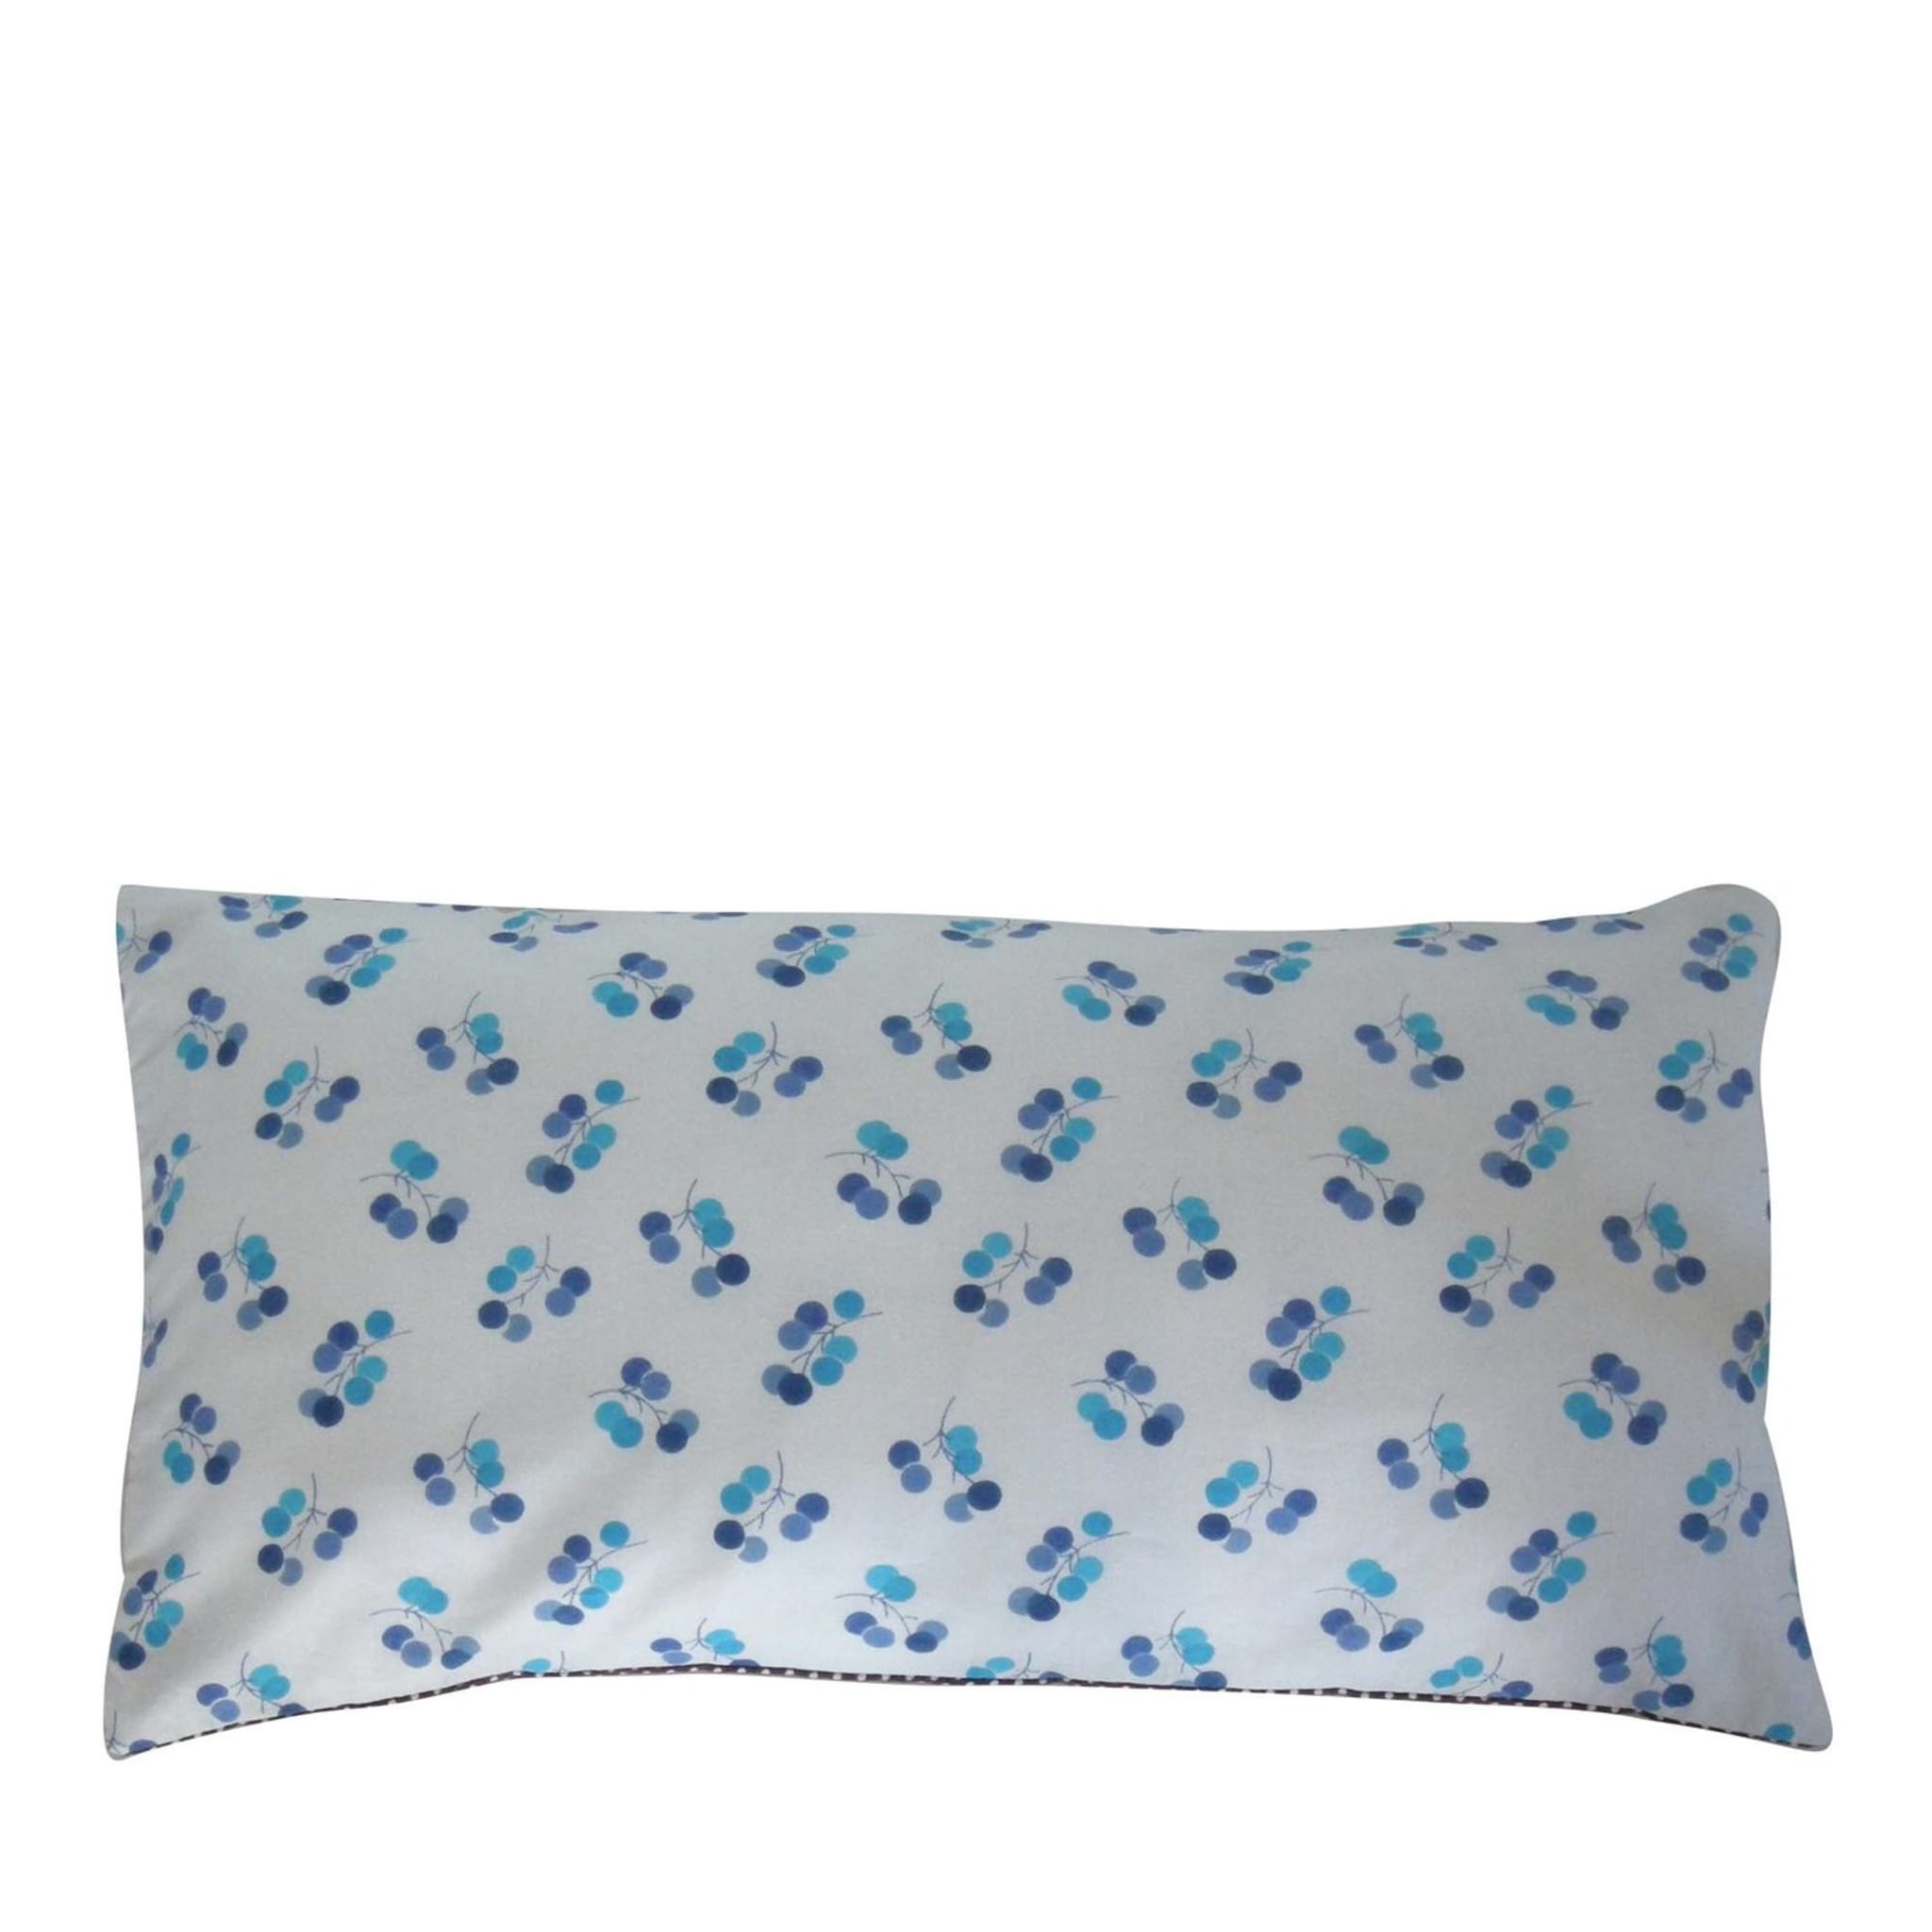 Light Blue Twigs and Dots Cushion - Main view